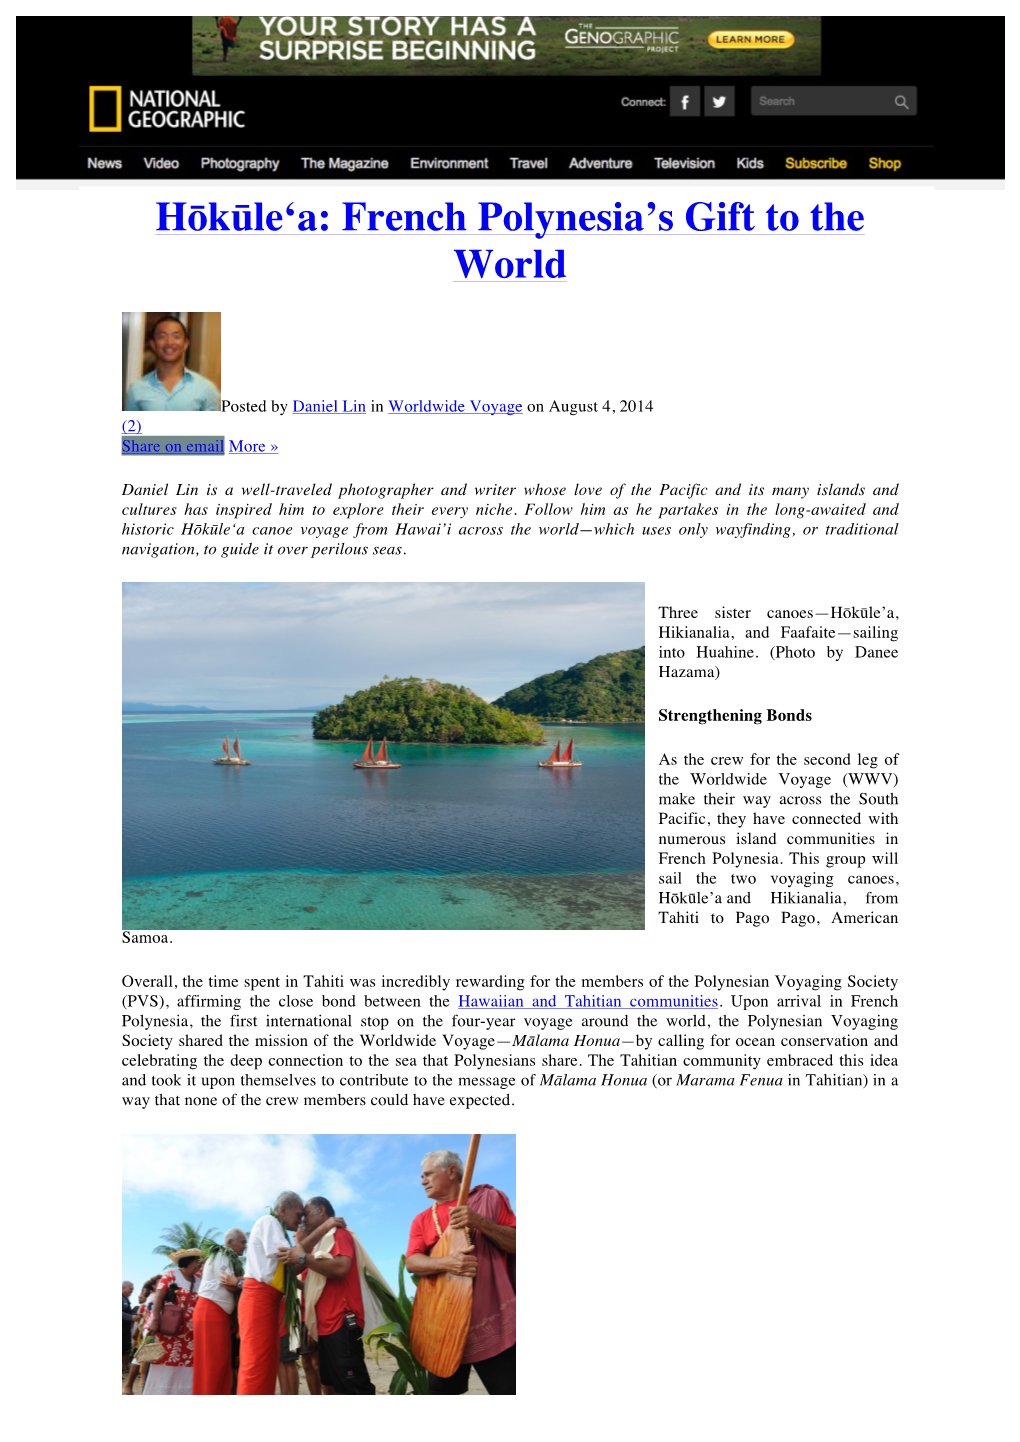 Hōkūleʻa: French Polynesia's Gift to the World